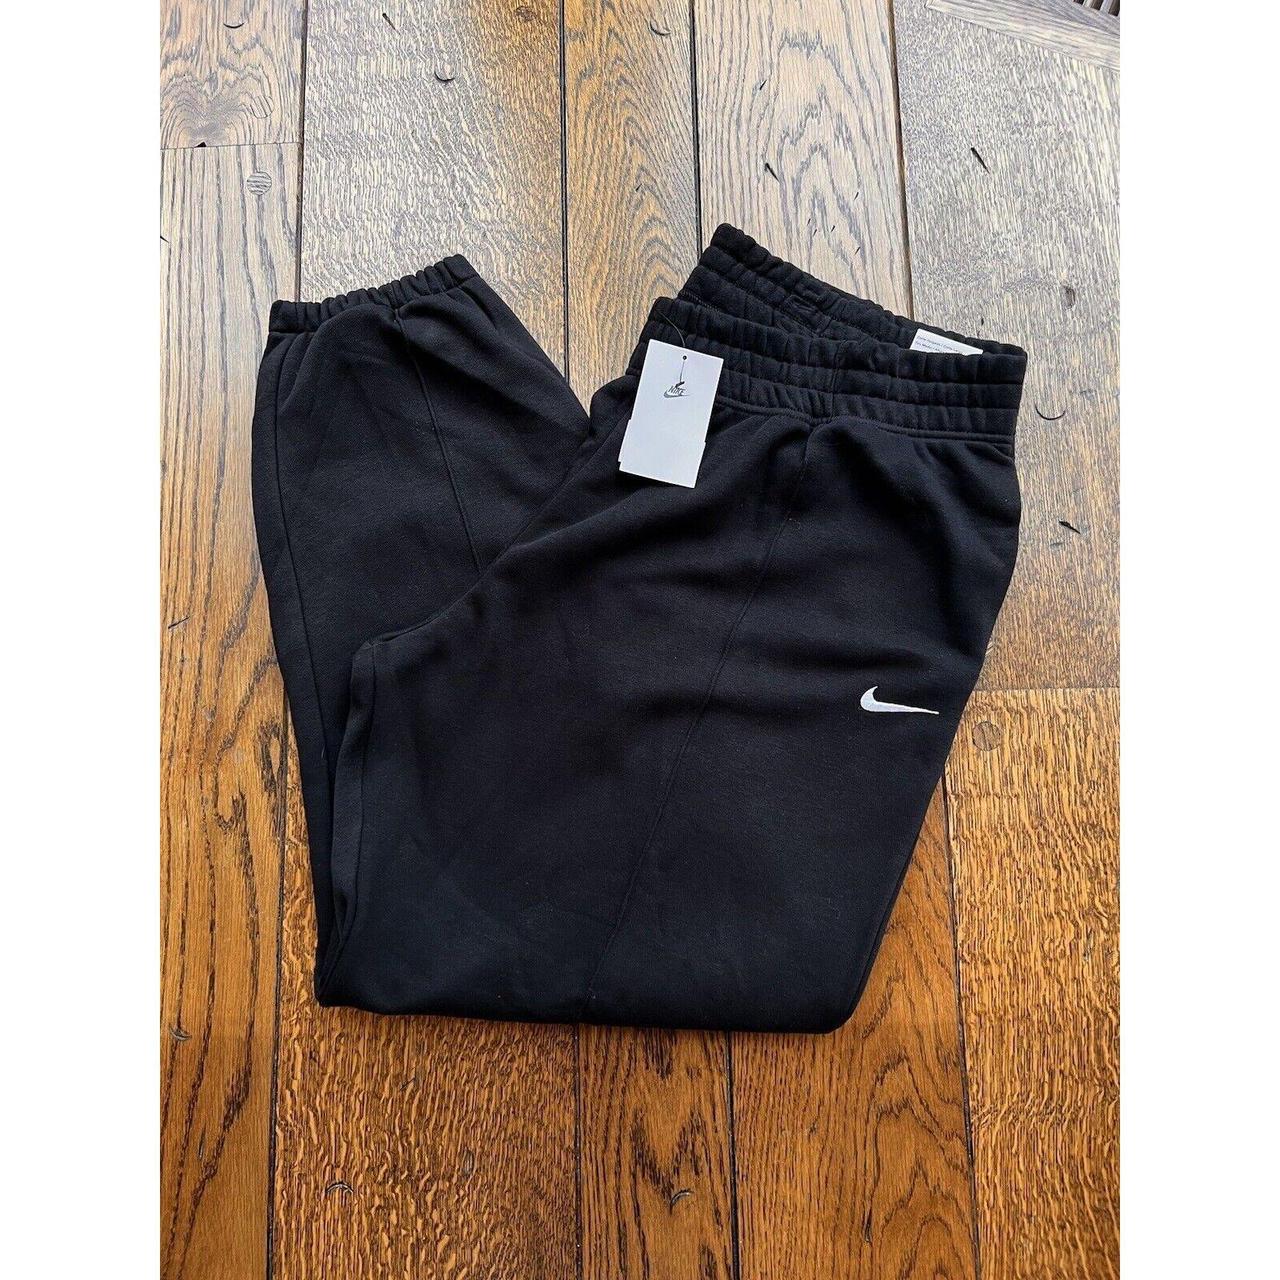 Elevate your casual wardrobe with these Nike Women's - Depop